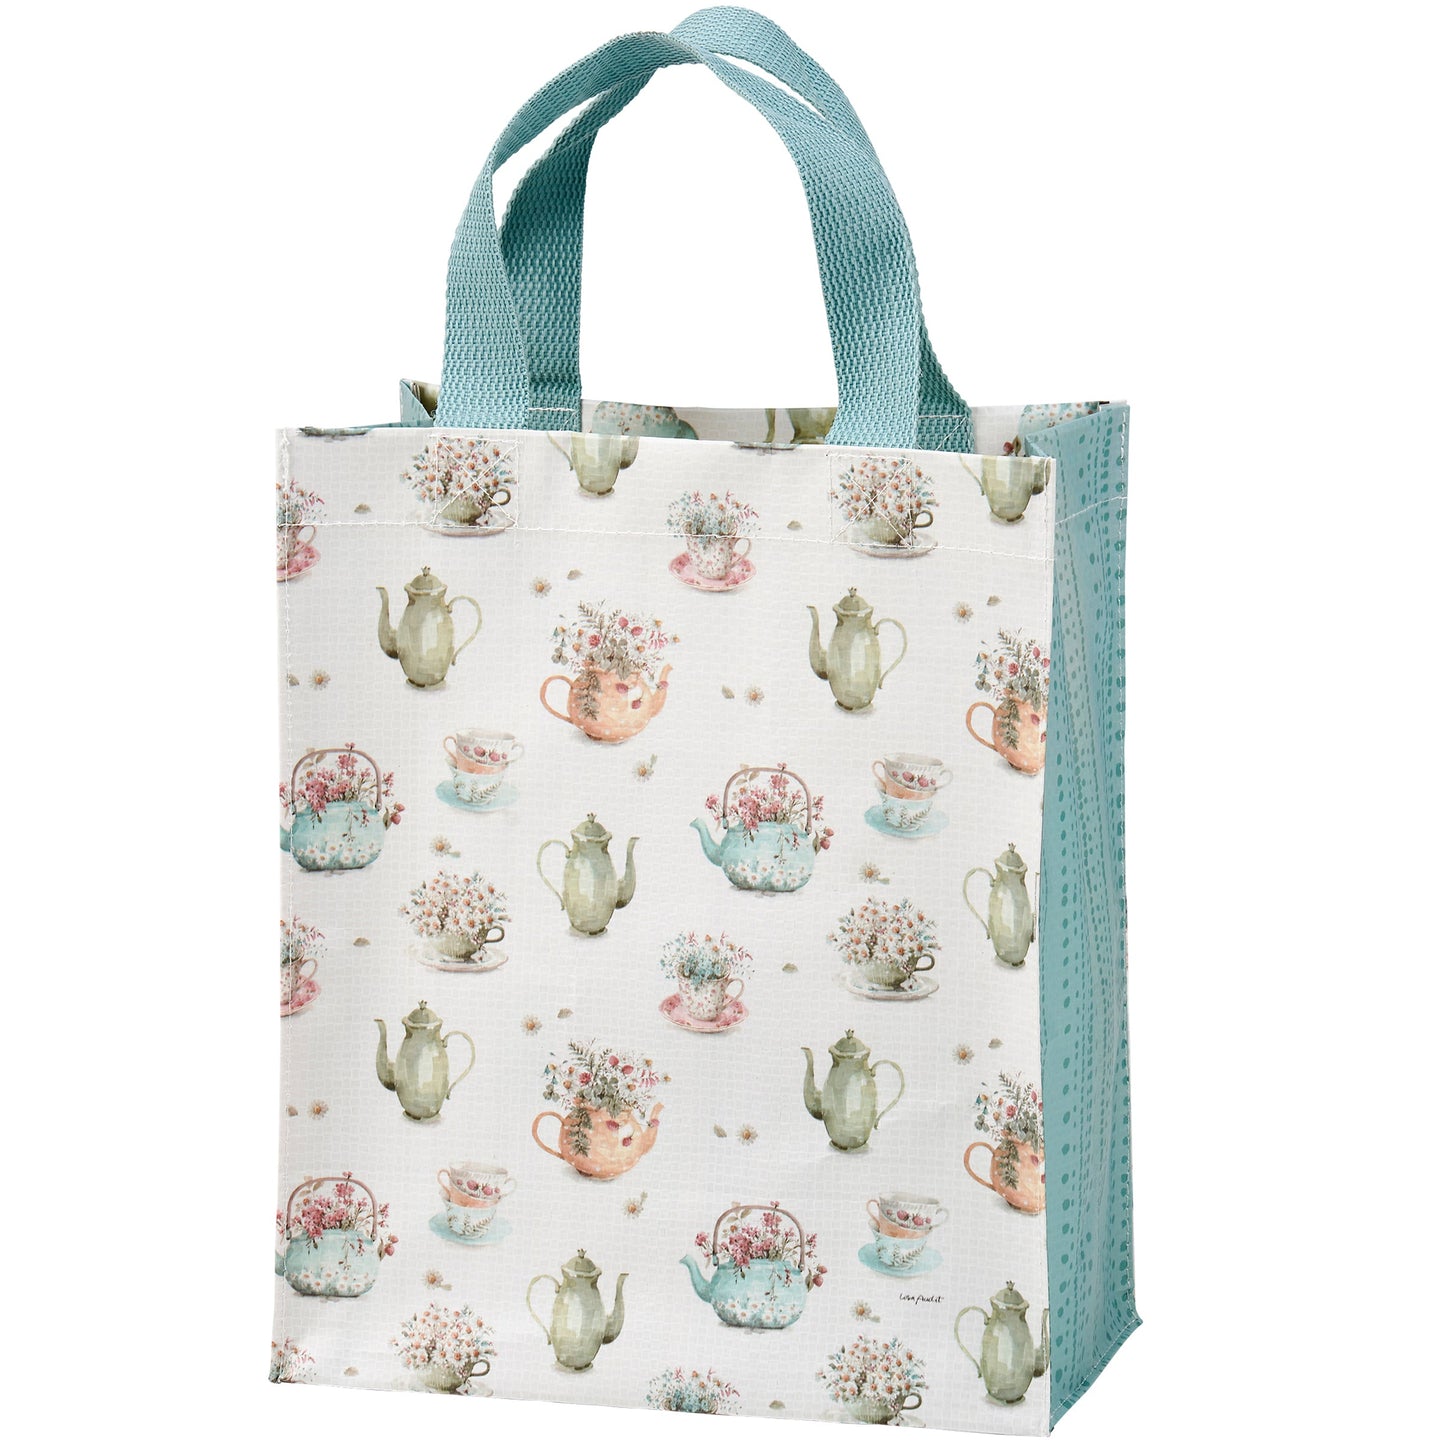 Tea Time Daily Tote Bag | Lunch Storage | 8.75" x 10.25" x 4.75"